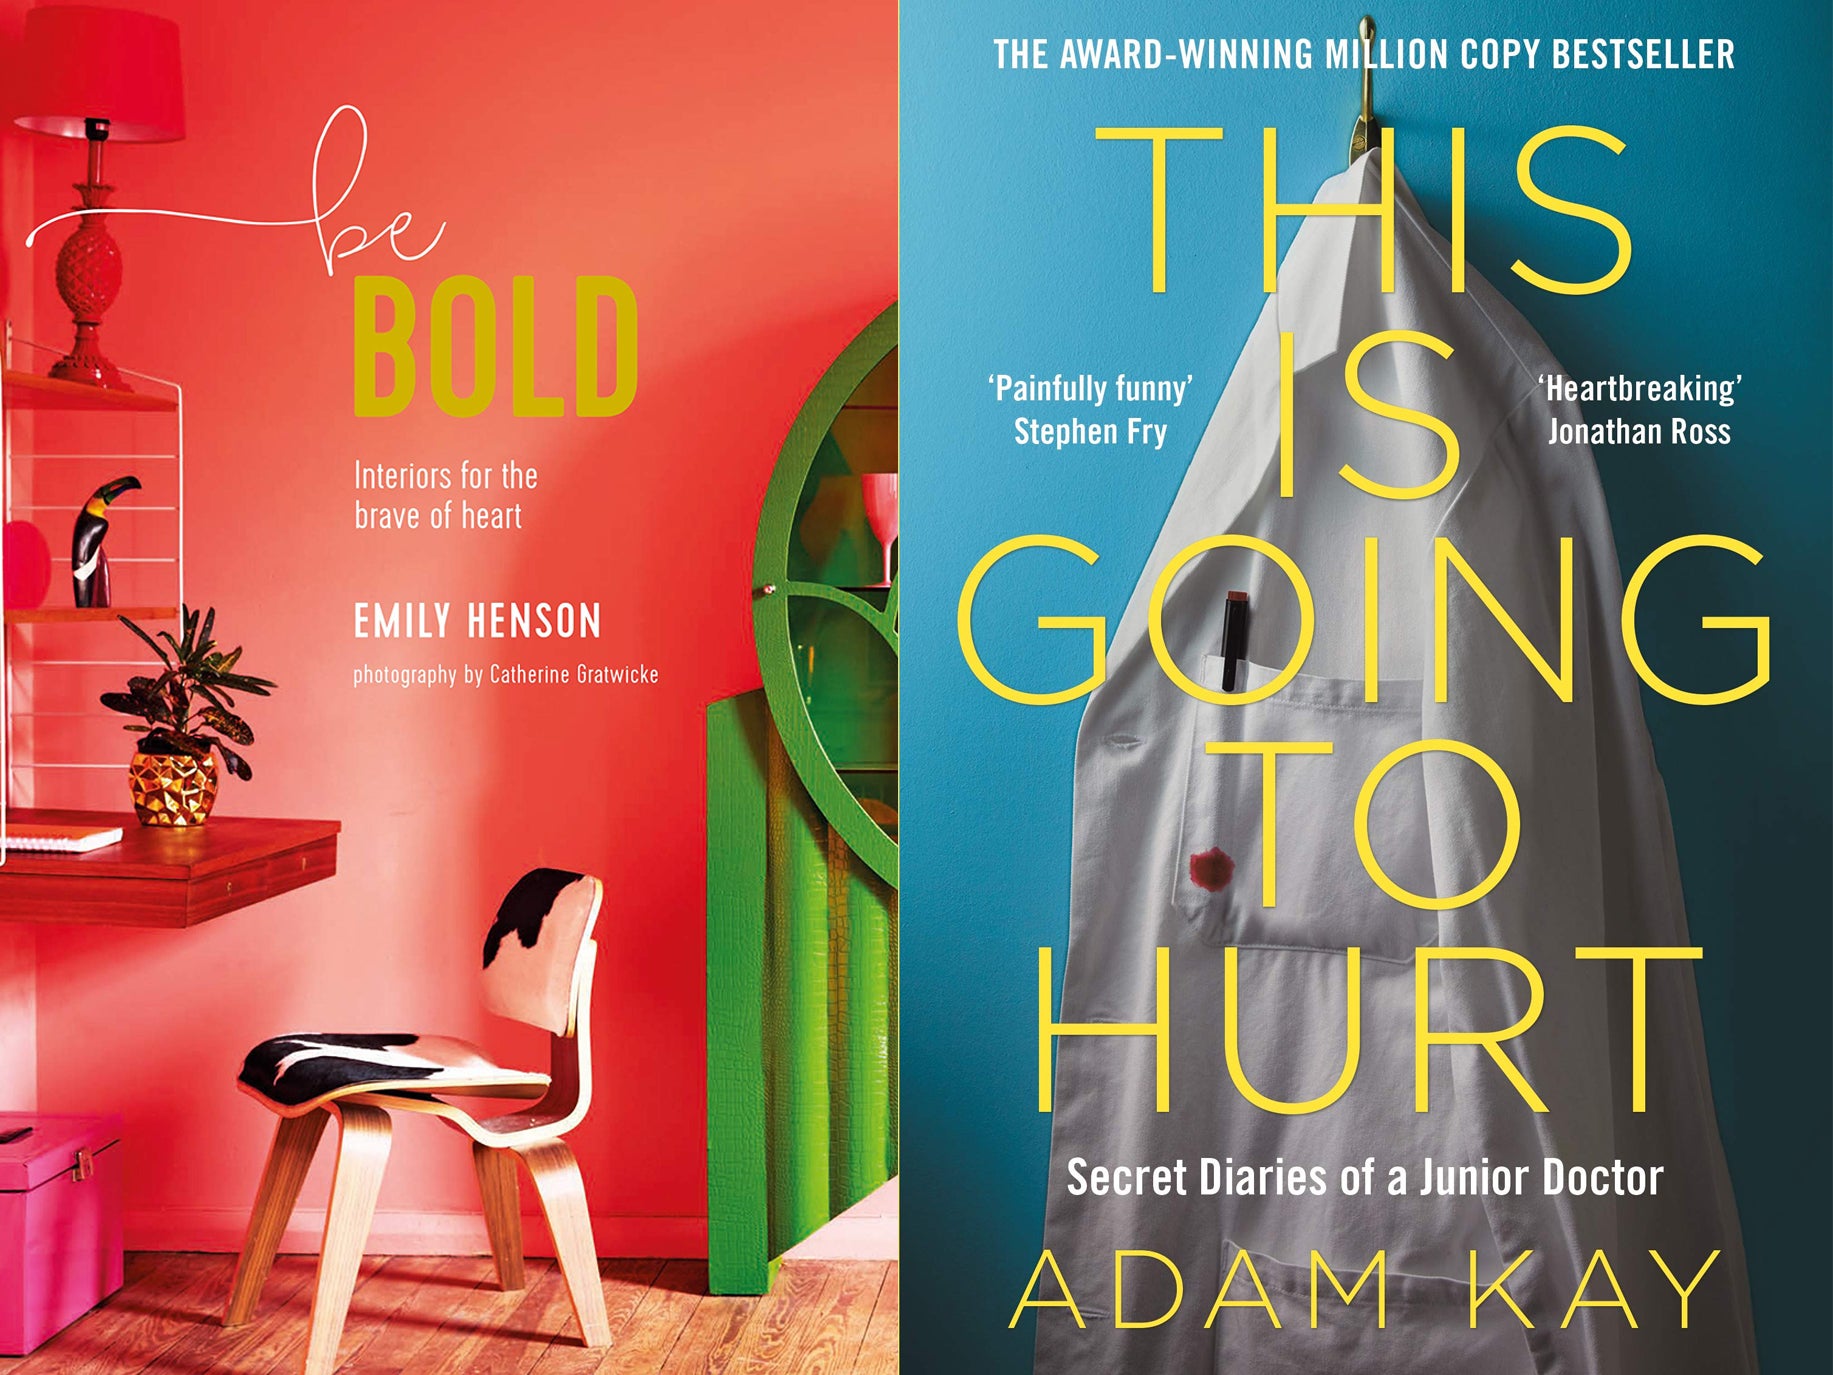 Make the most of 2018's offering with our roundup, compiled by book-lovers